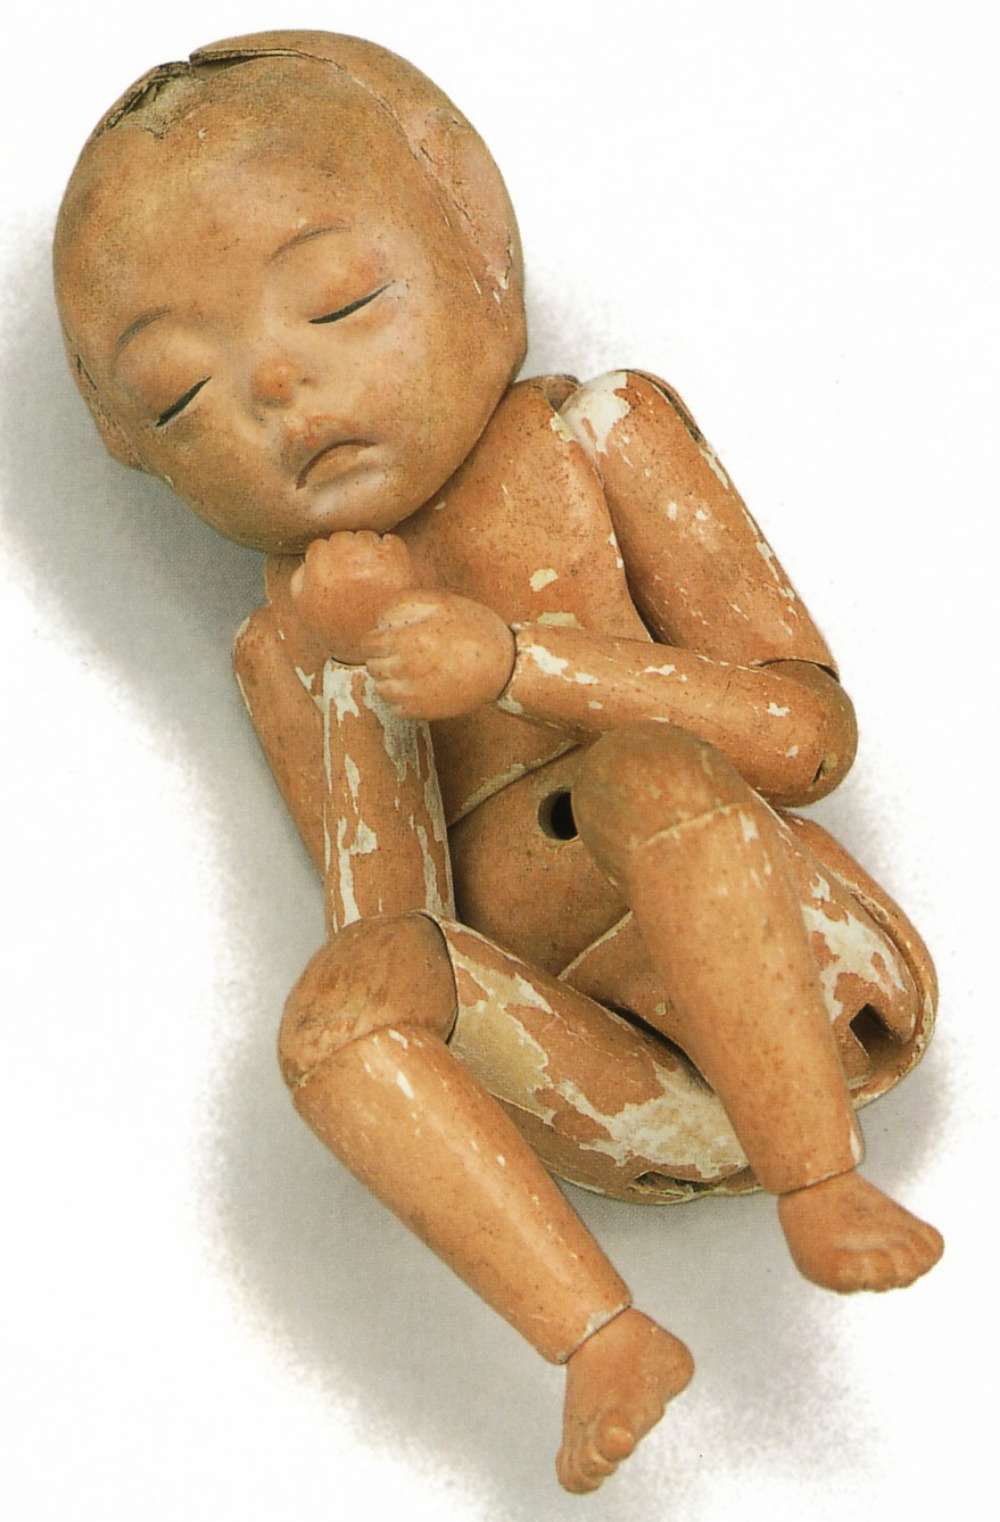 19th Century Japanese Pregnancy Dolls: A Fascinating Peek into Edo Period Sideshow Attractions